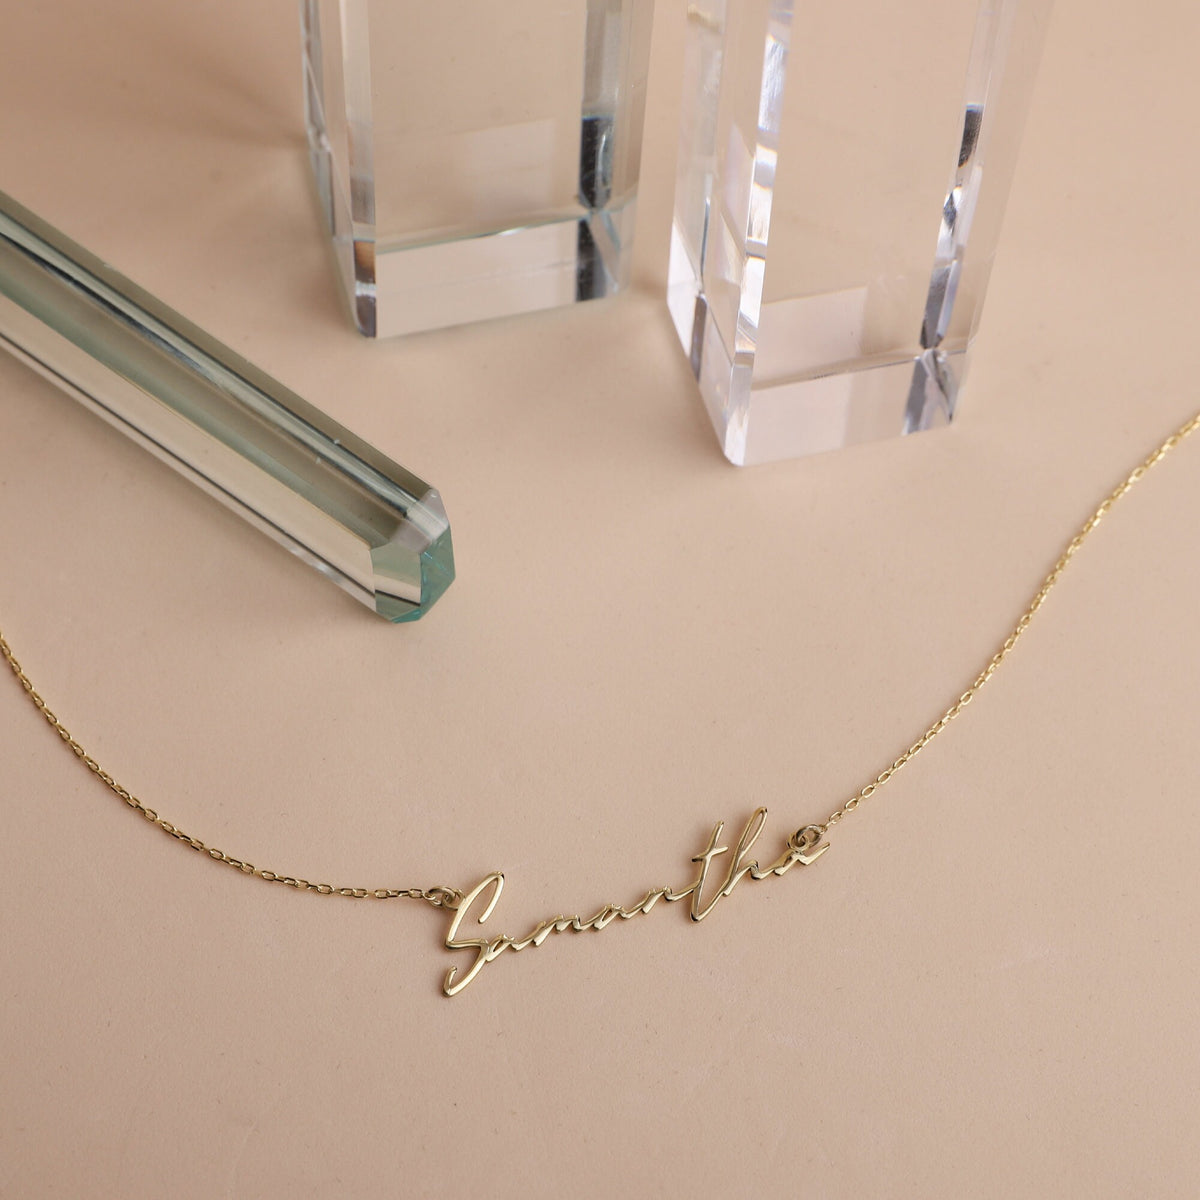 14K Solid Gold Cursive Name Necklace For Women, Real Gold Personalized Name Jewelry with Birthstone add on • Gift for Her